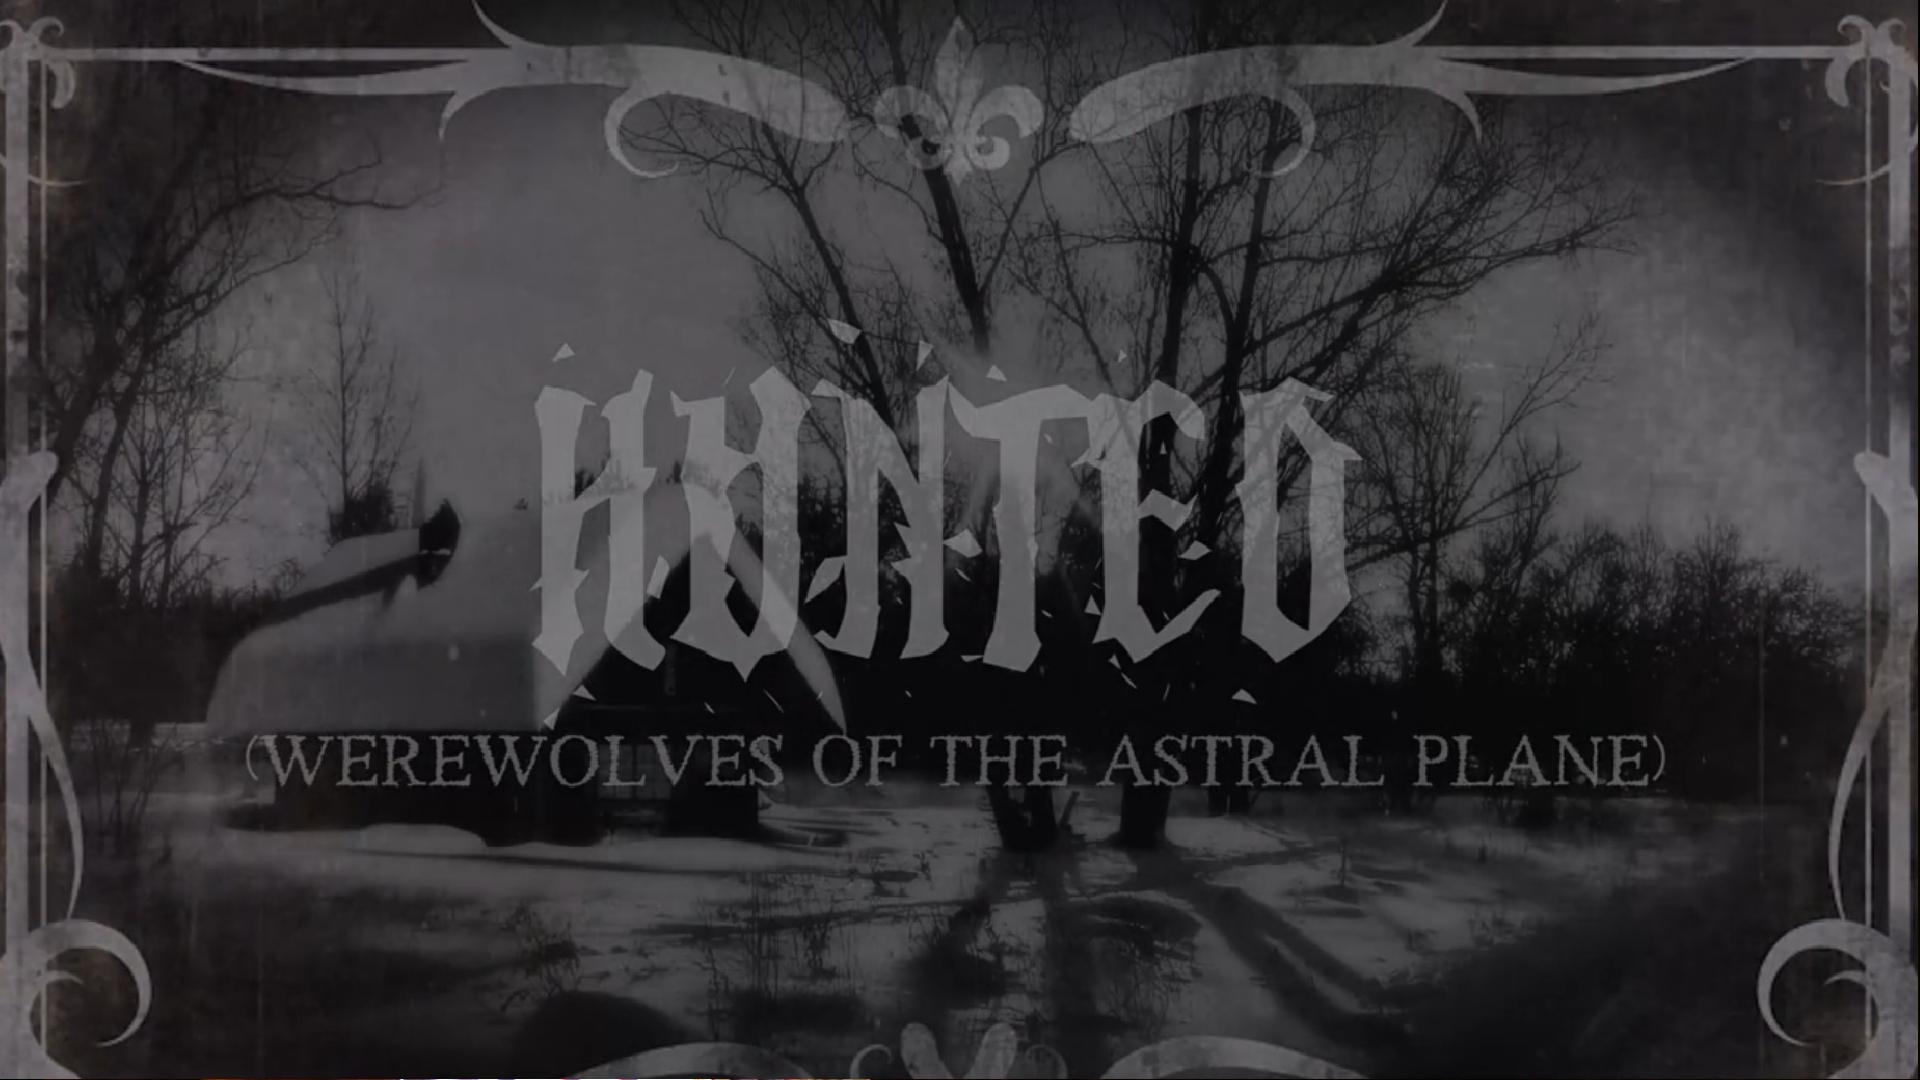 HUNTED (Werewolves of the Astral Plane)